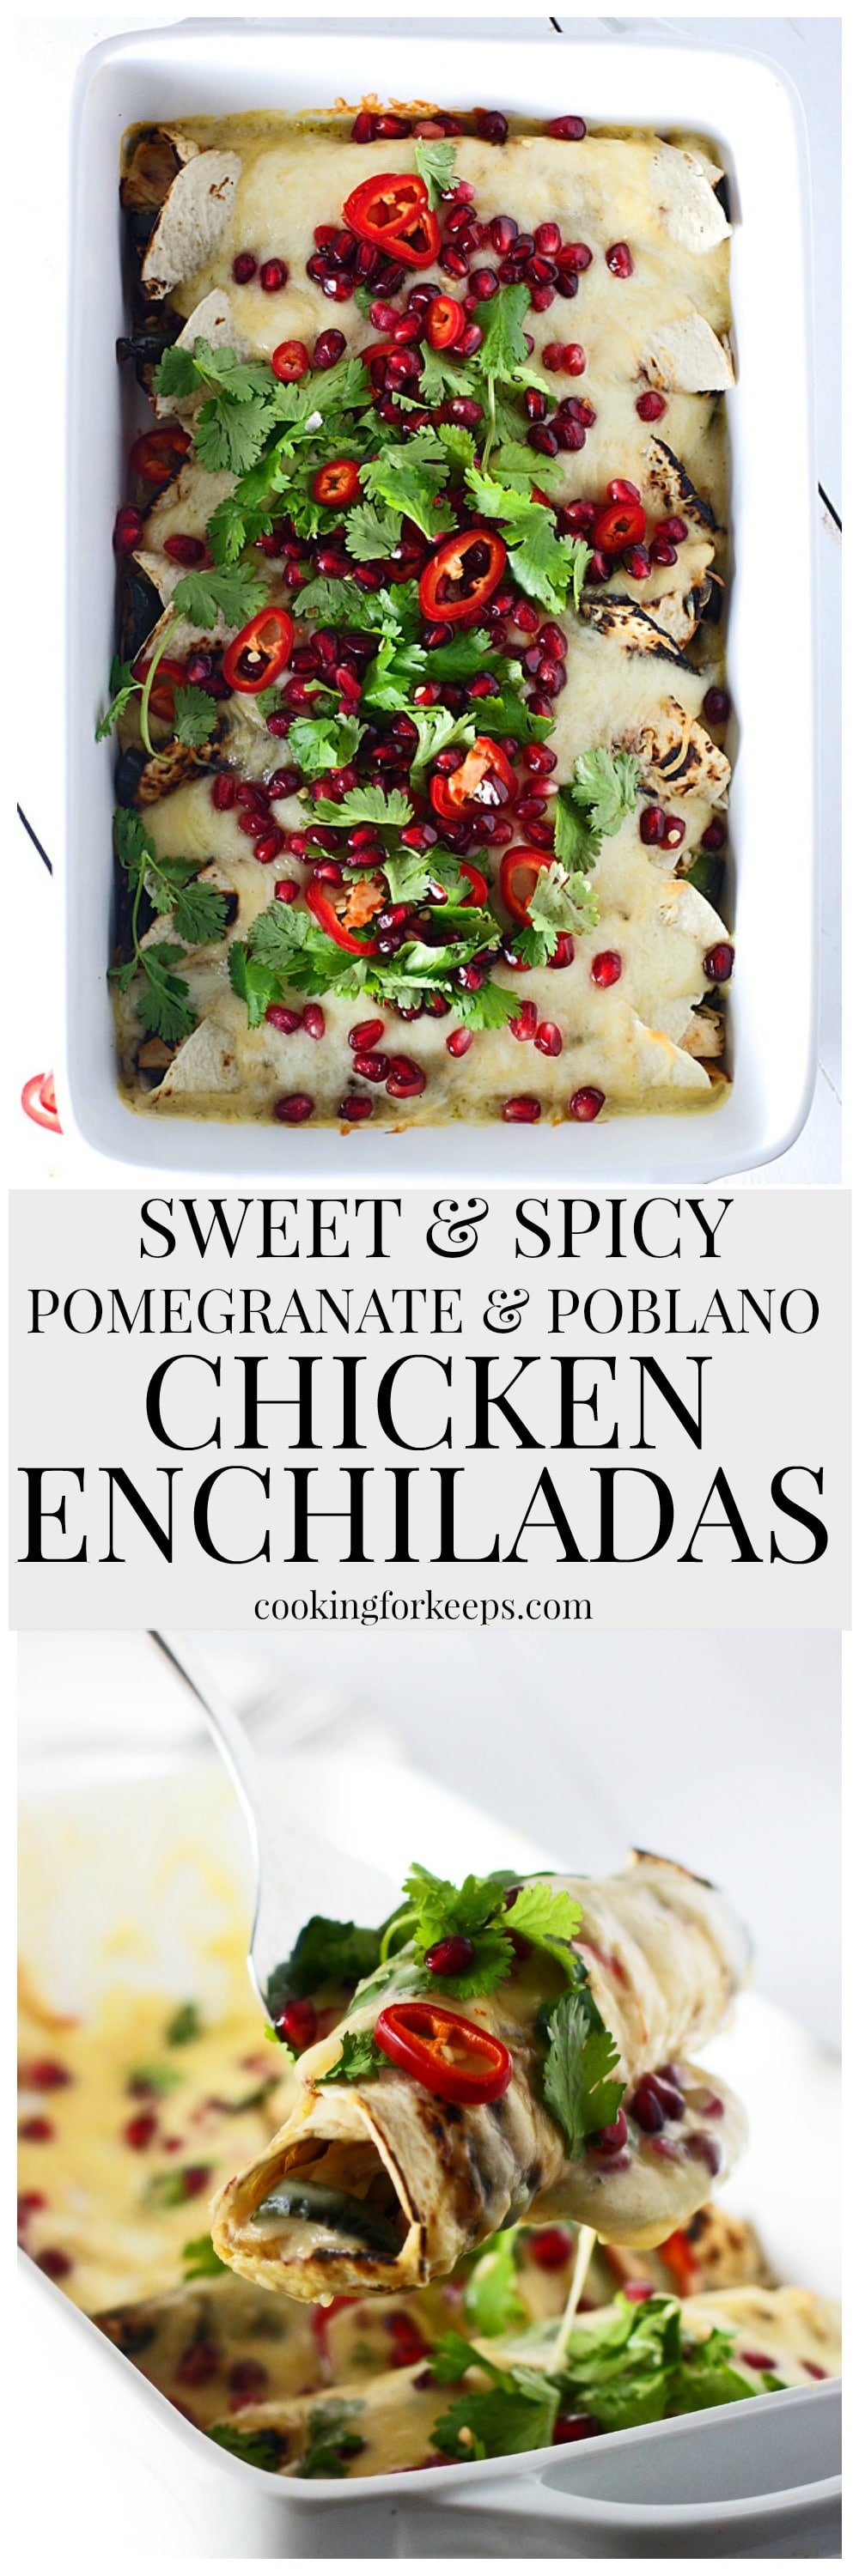 Sweet and Spicy Pomegranate and Poblano Chicken Enchiladas